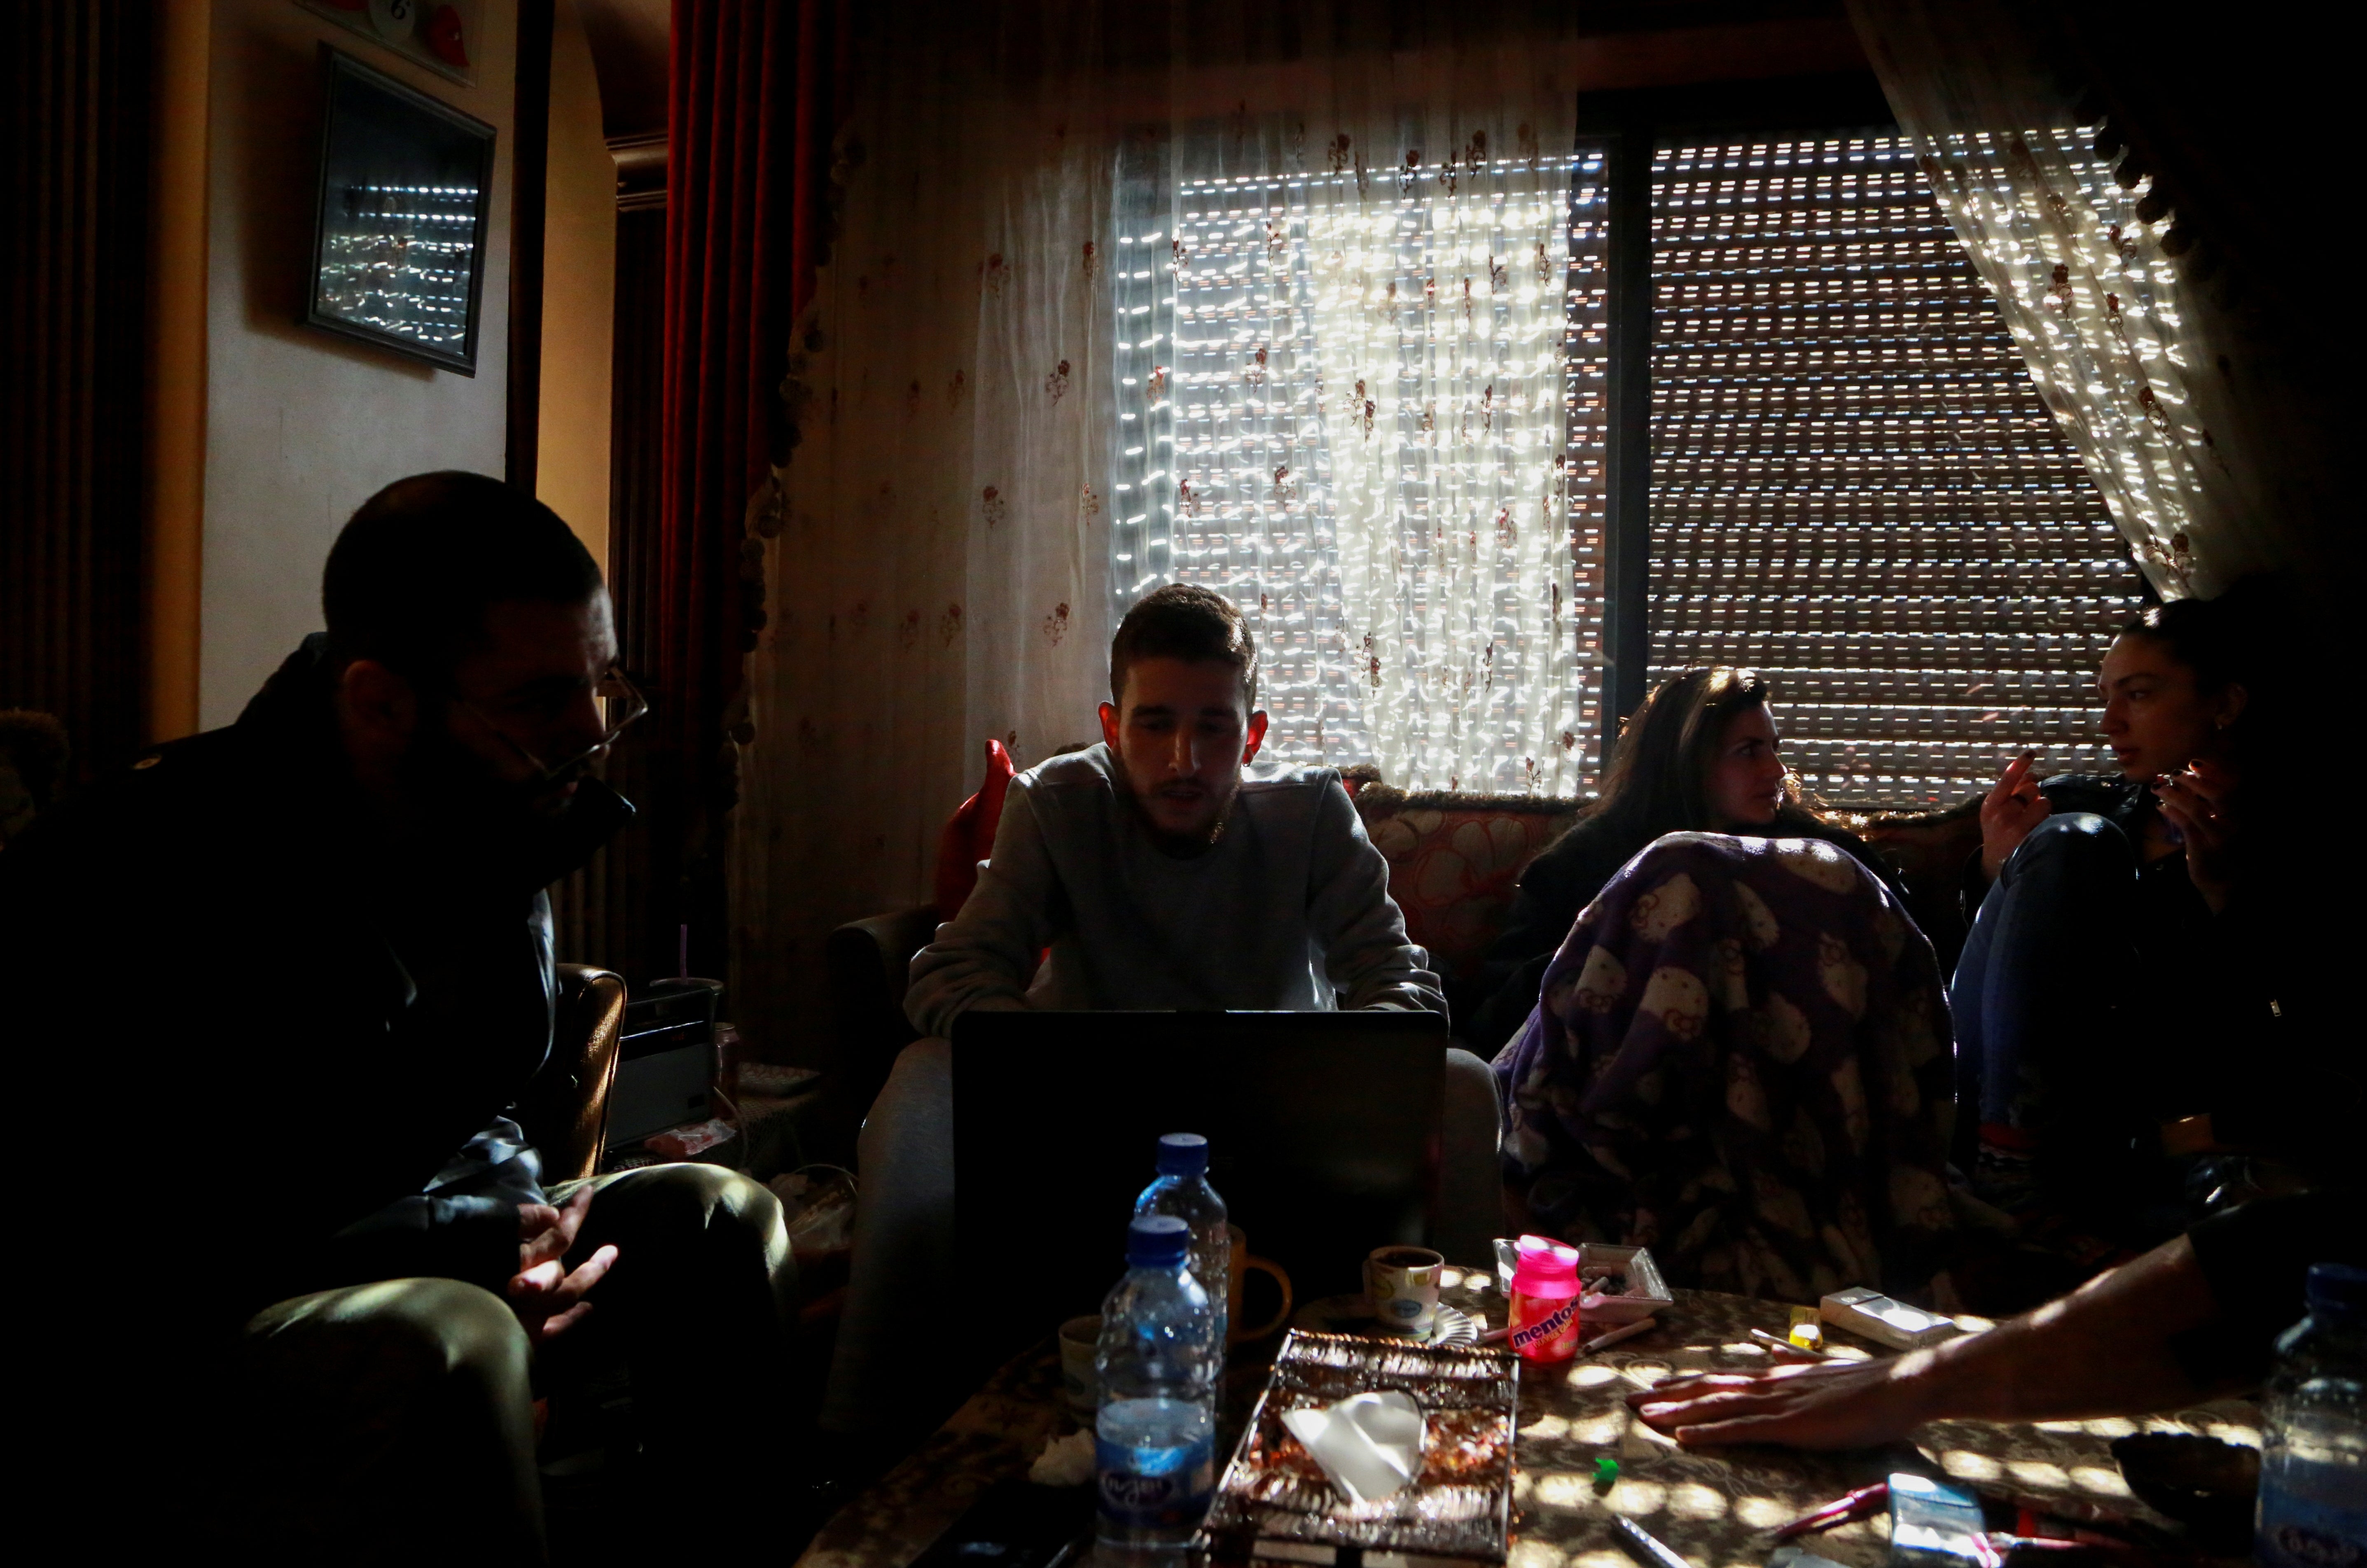 Jawad works on his laptop as he sits with his friends at his home